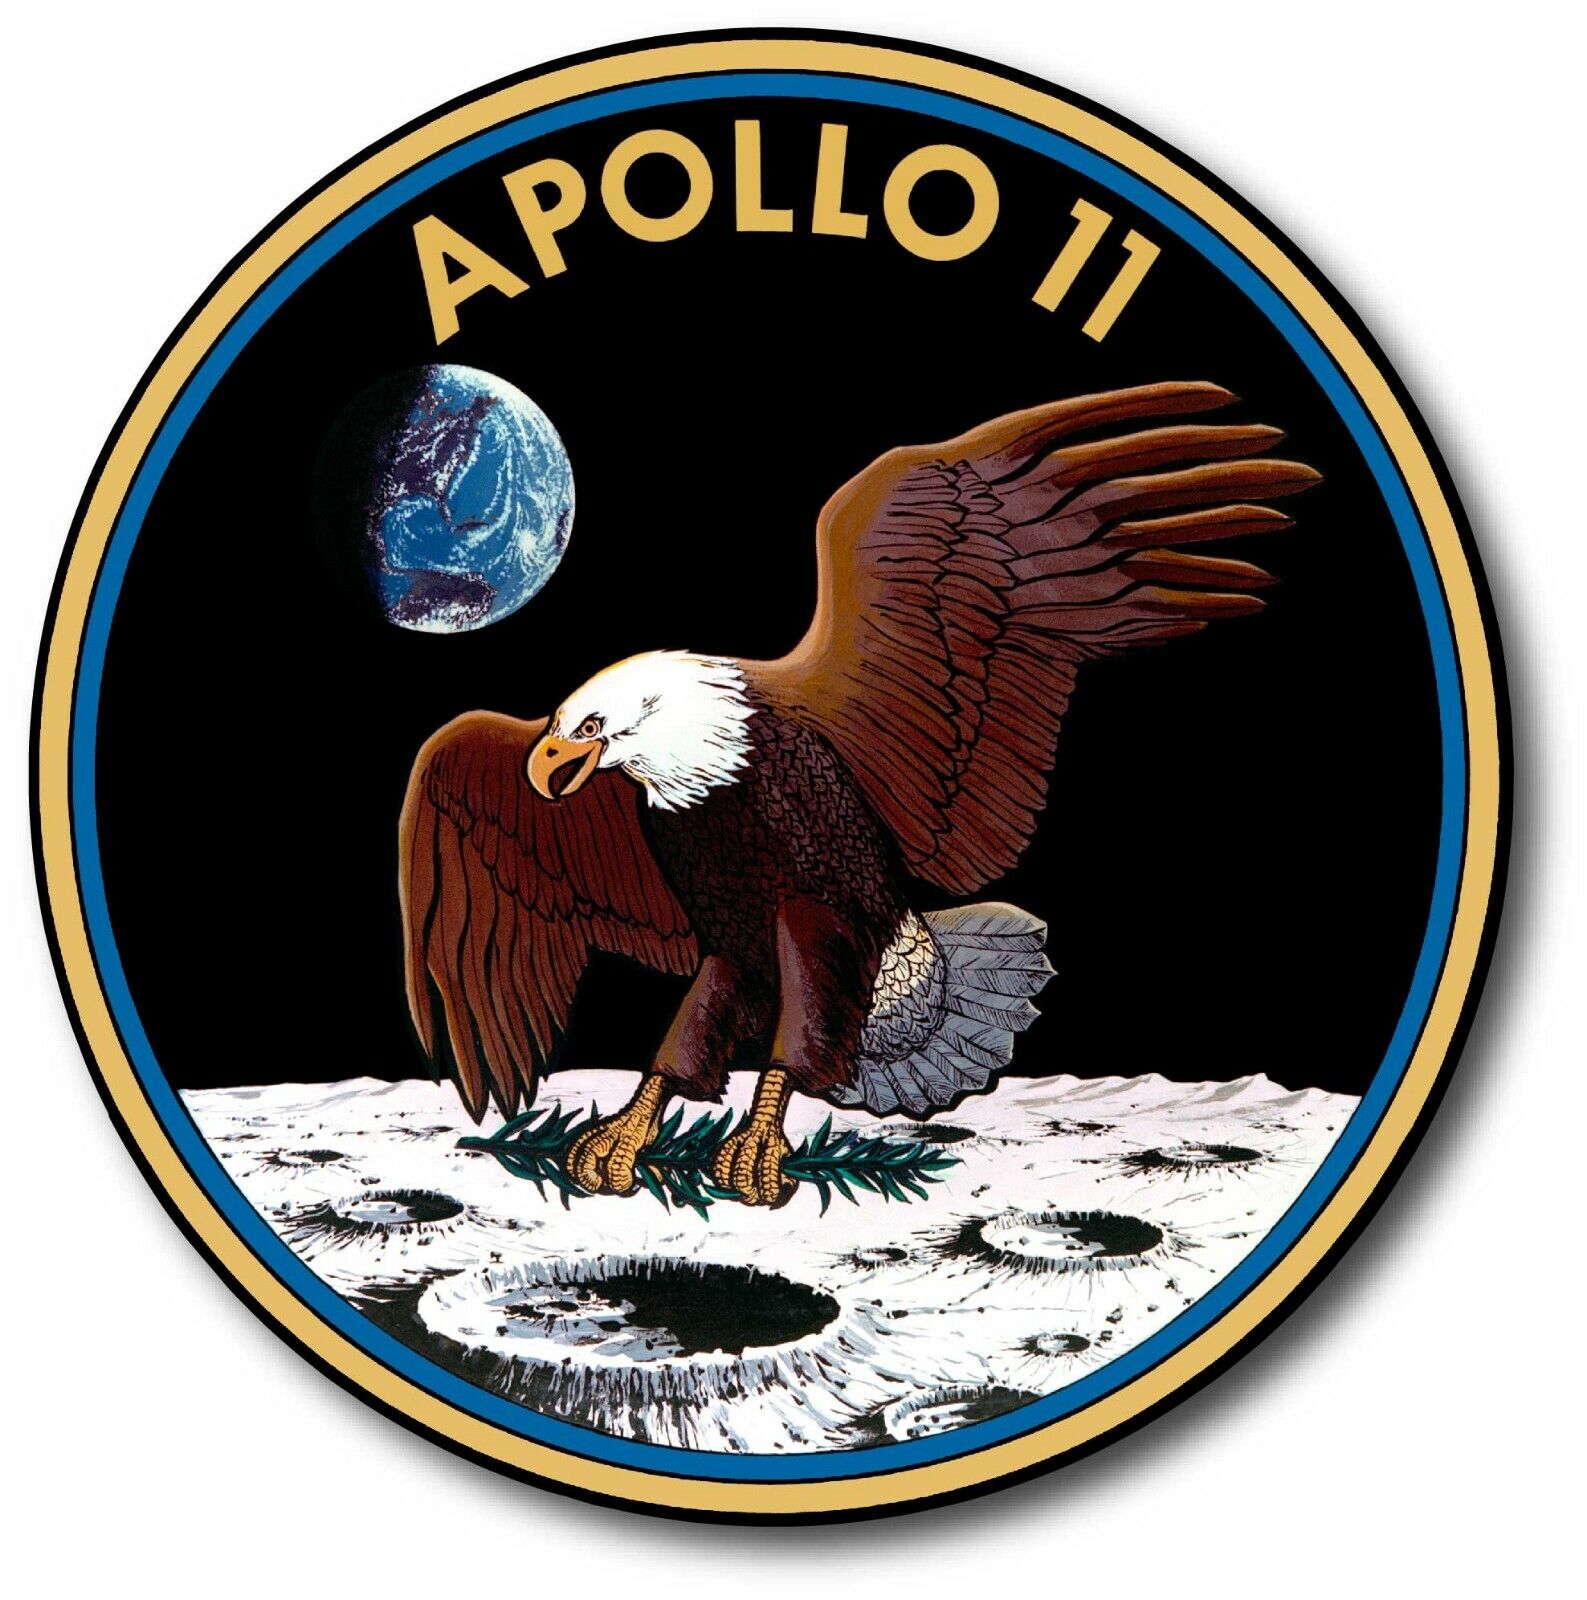 NASA APOLLO 11 MILITARY ARMED FORCES DECAL STICKER USA TRUCK VEHICLE WINDOW CAR